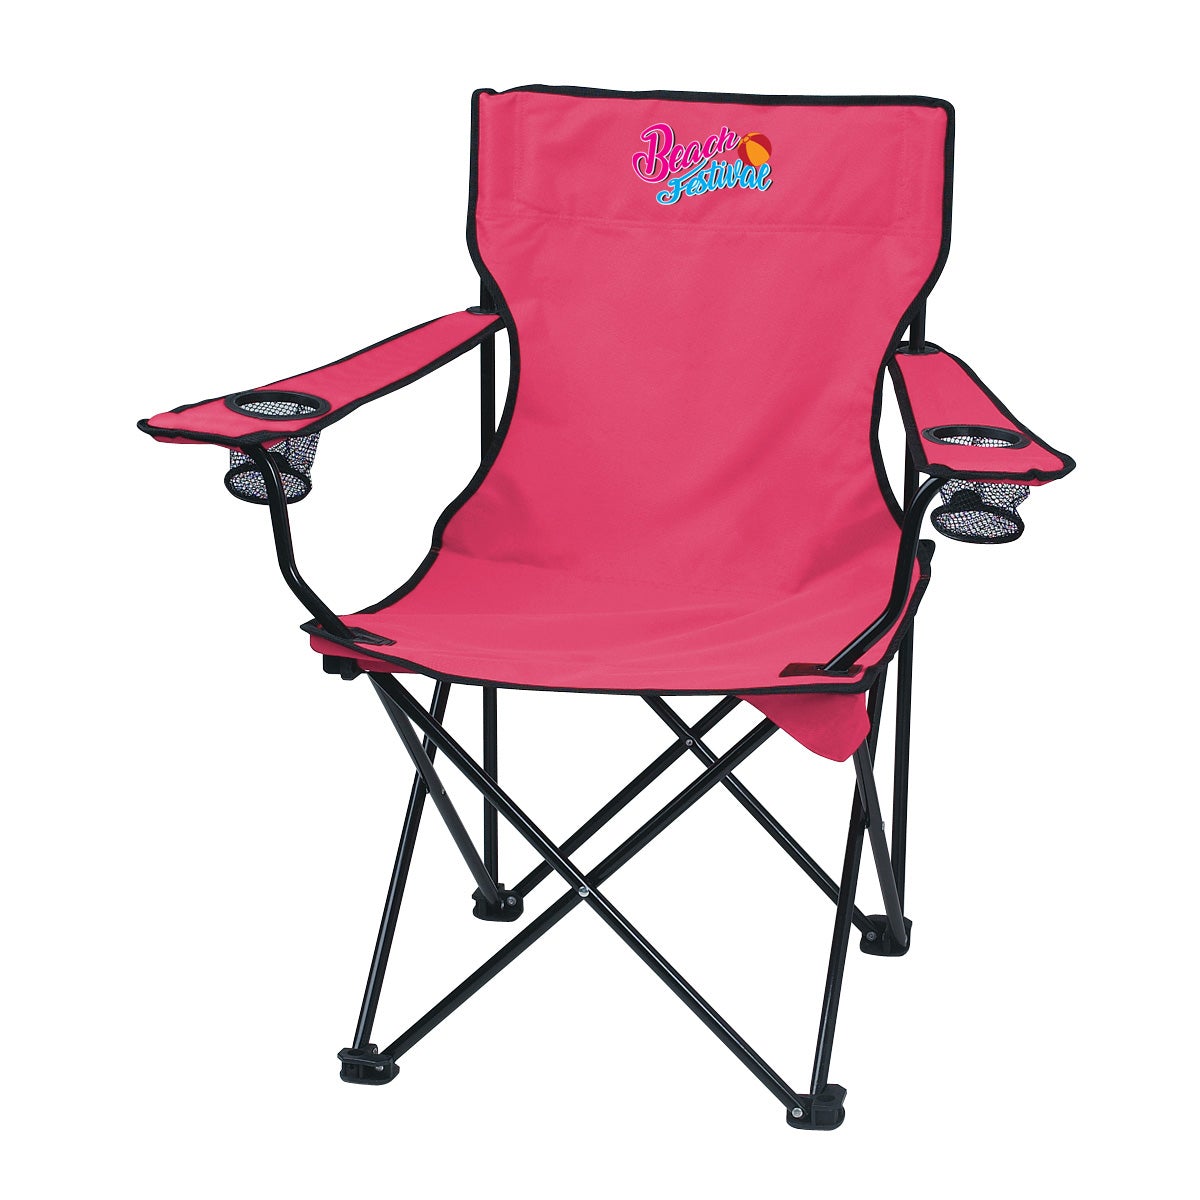 Folding Chair with Carrying Bag Chairs Hit Promo Pink Multi Color 